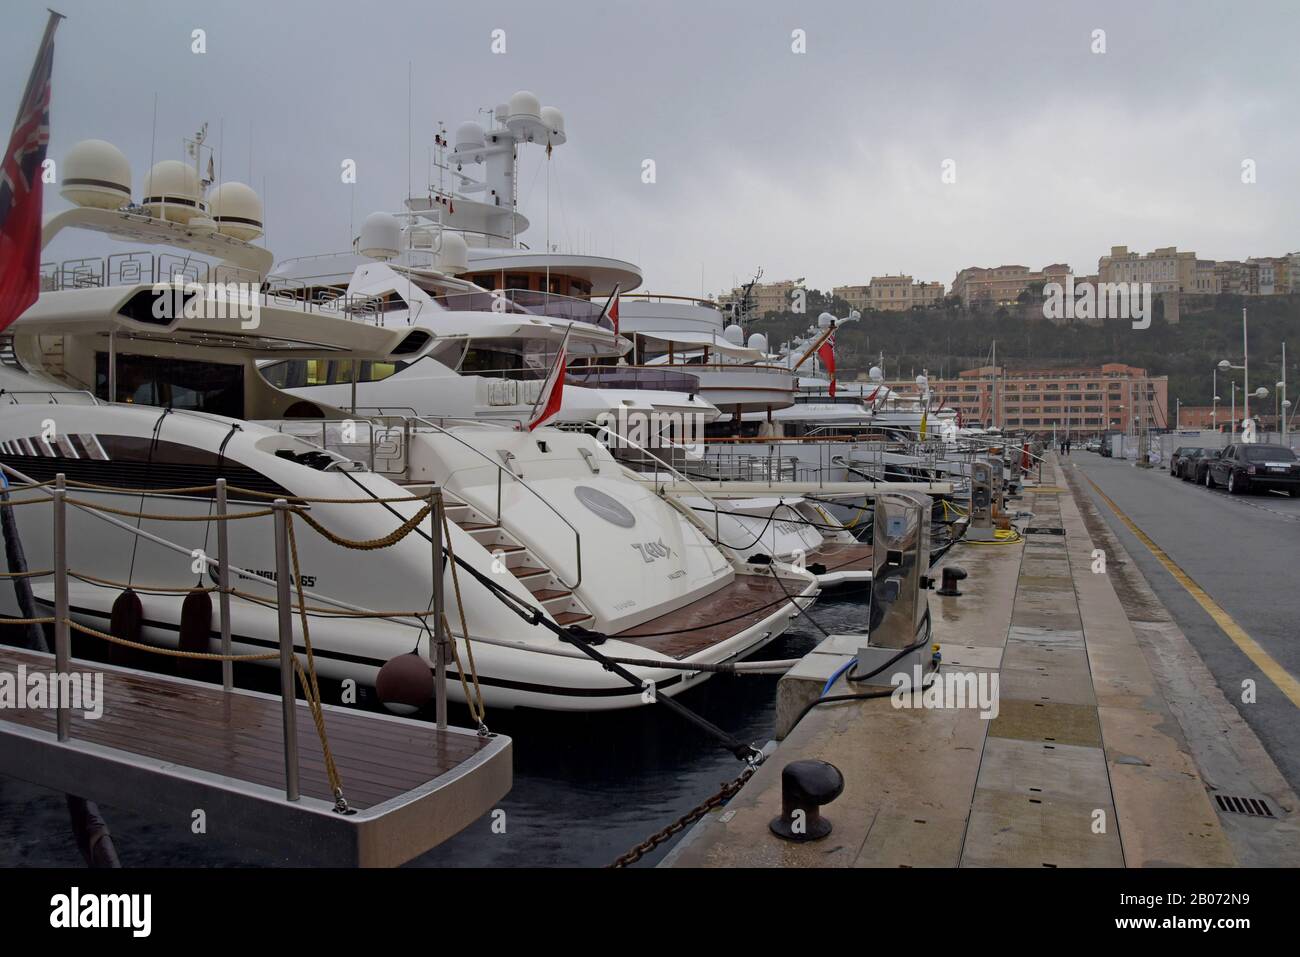 Ssuper yachts moored in the harbour at Monte Carlo, Monaco. 17th ...